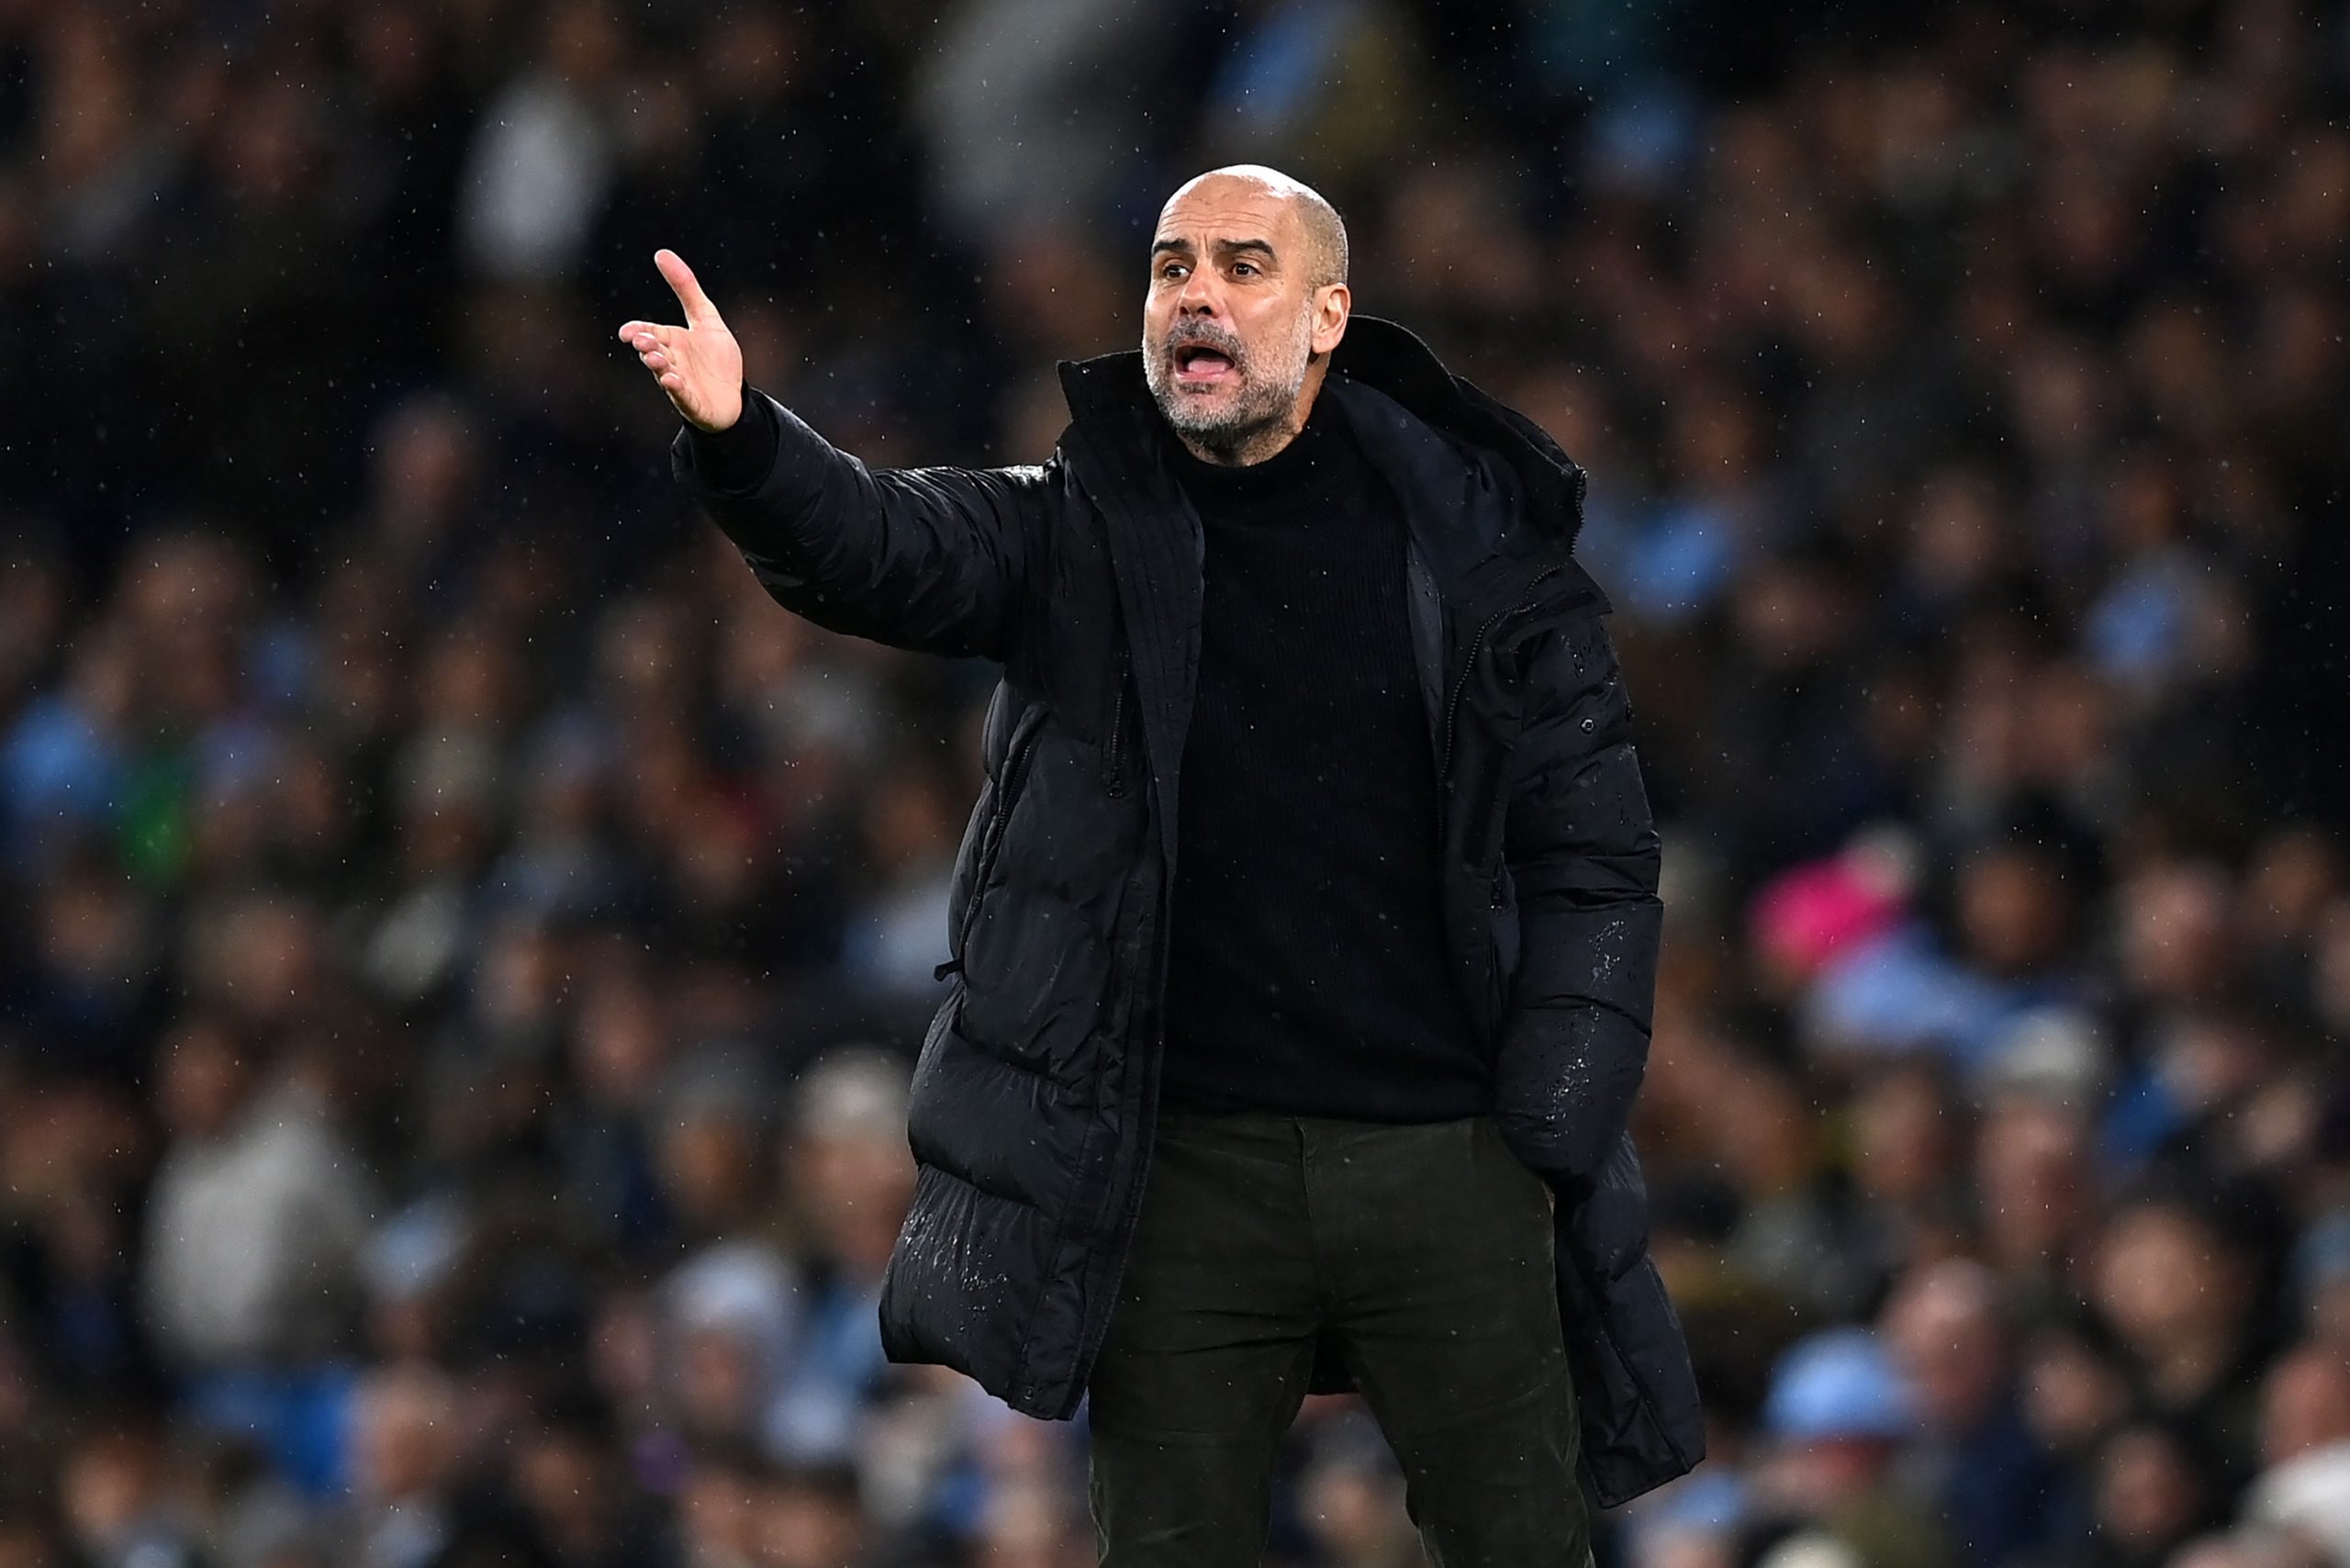 MANCHESTER, ENGLAND - MARCH 18: Pep Guardiola, Manager of Manchester City, looks on during the Emirates FA Cup Quarter Final match between Manchester City and Burnley at Etihad Stadium on March 18, 2023 in Manchester, England. (Photo by Michael Regan/Getty Images)